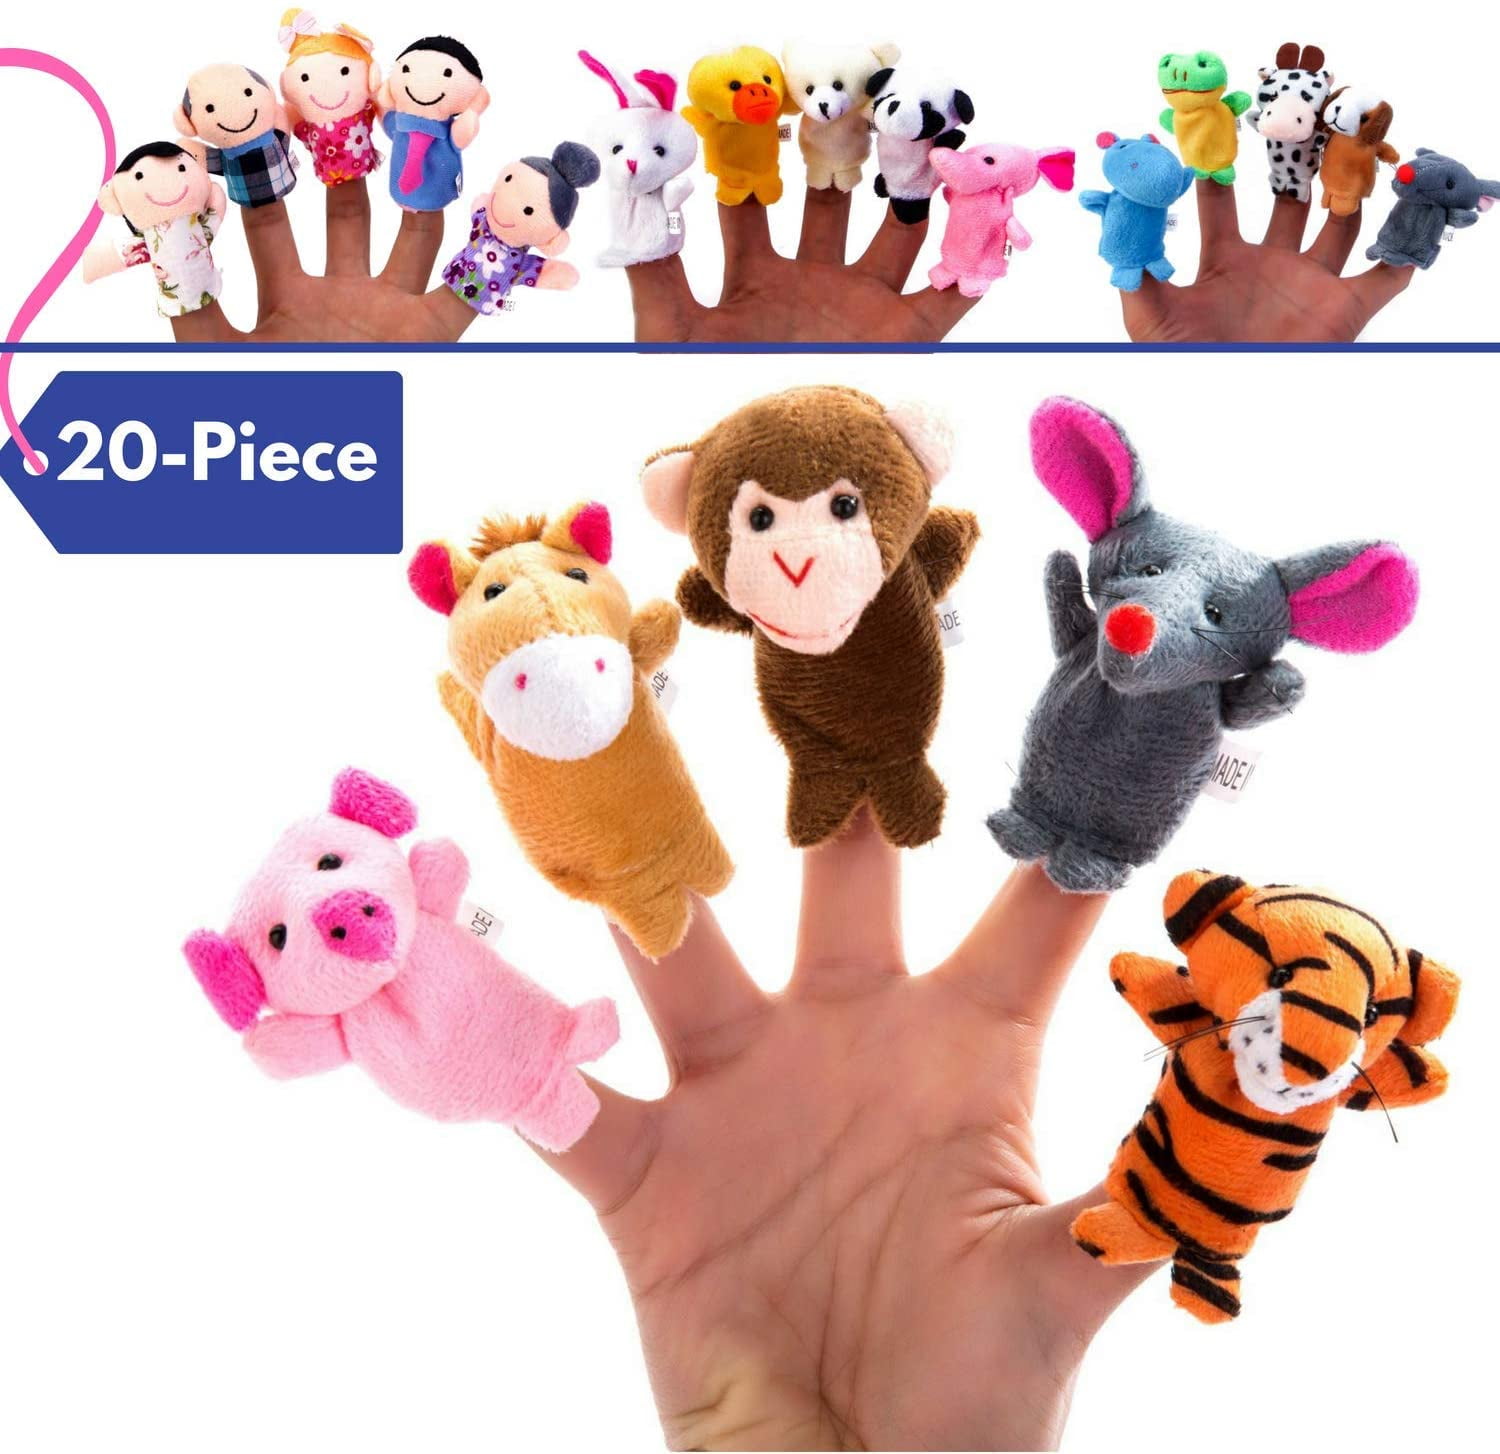 Story Finger Puppet Show 6 People Family Members Educational Toy Pretend & Play 